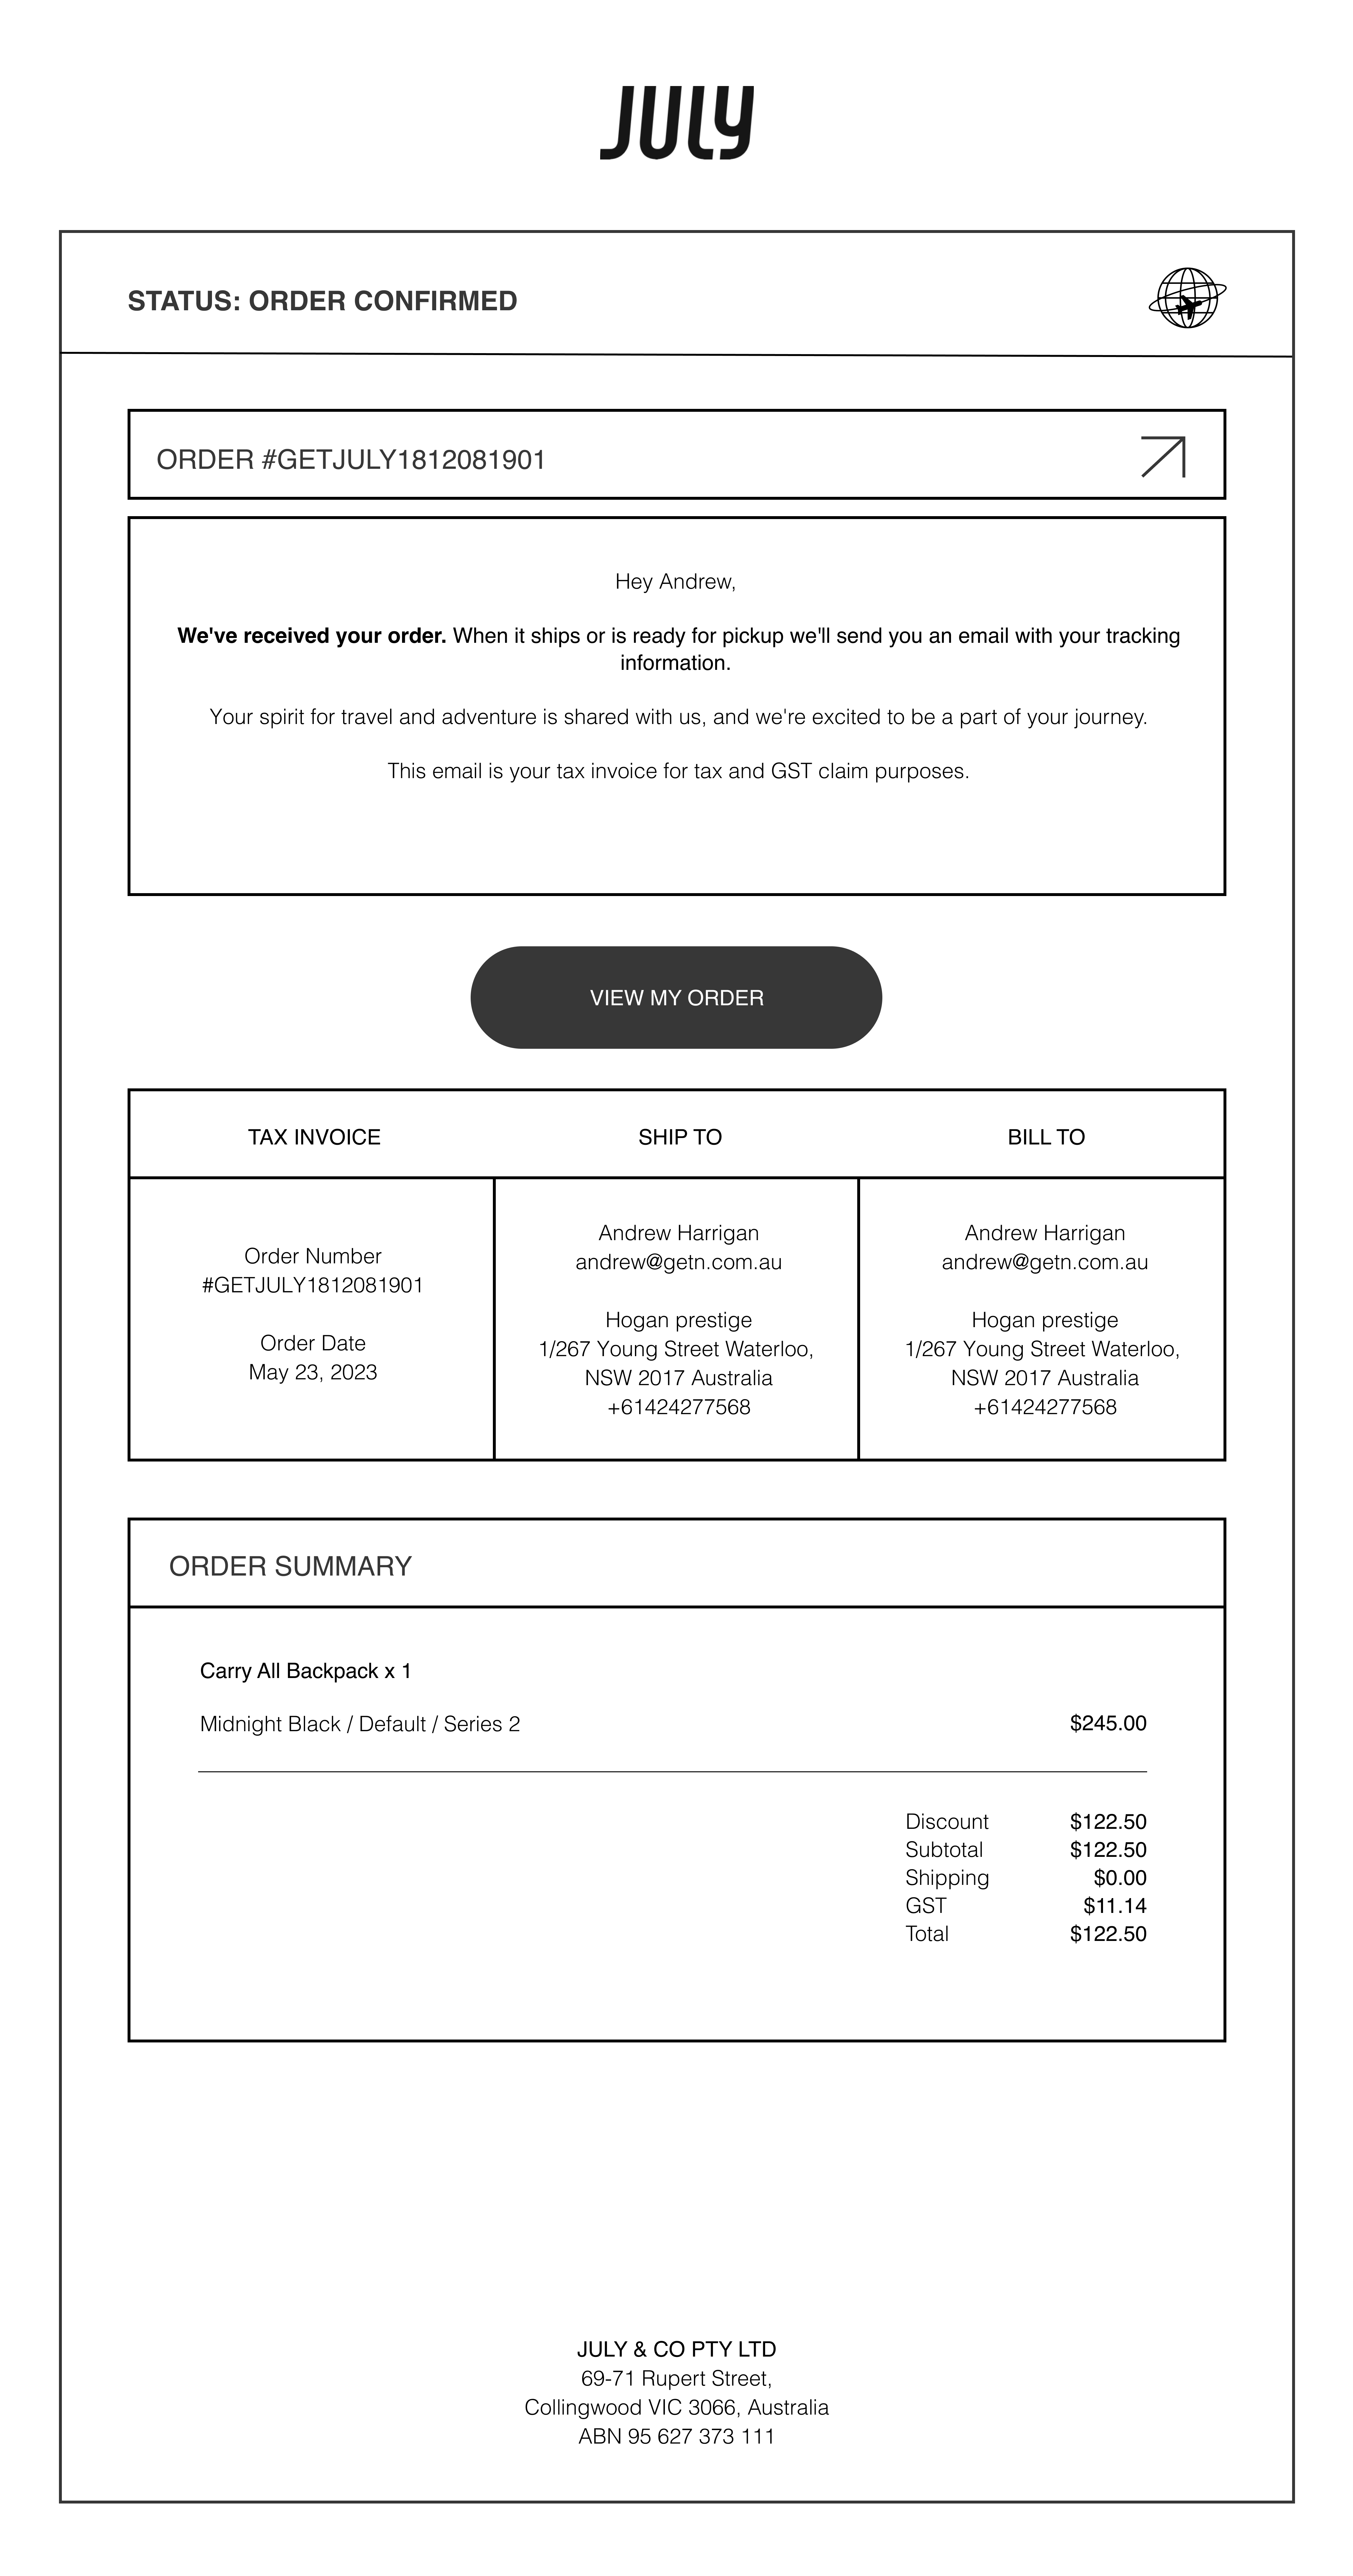 July Order Confirmation Industry Email Template screenshot